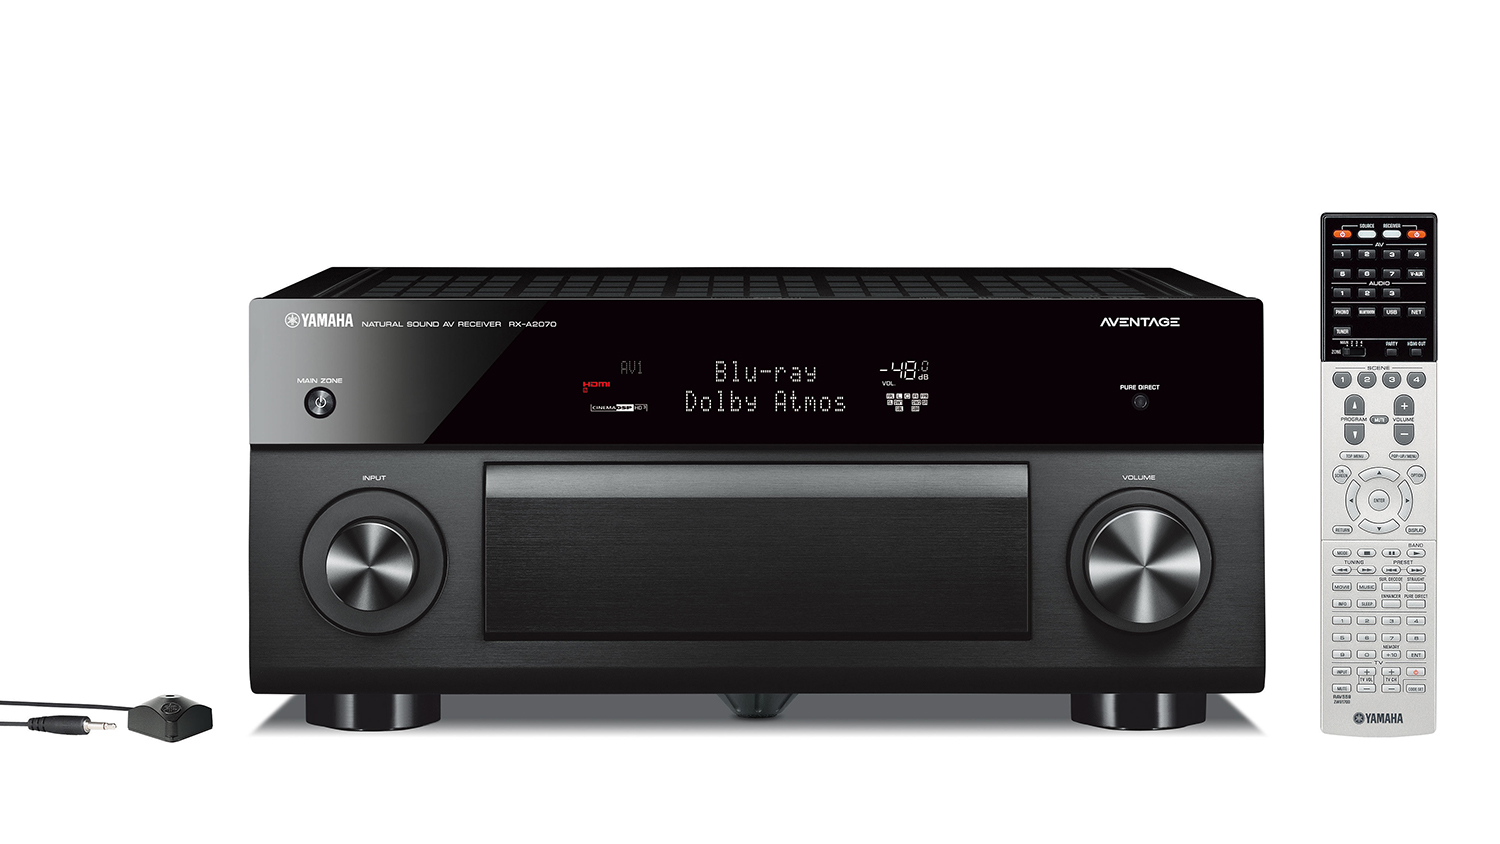 yamaha aventage rx a 70 series receivers 2017 pricing availability rxa2070blfructkrls f